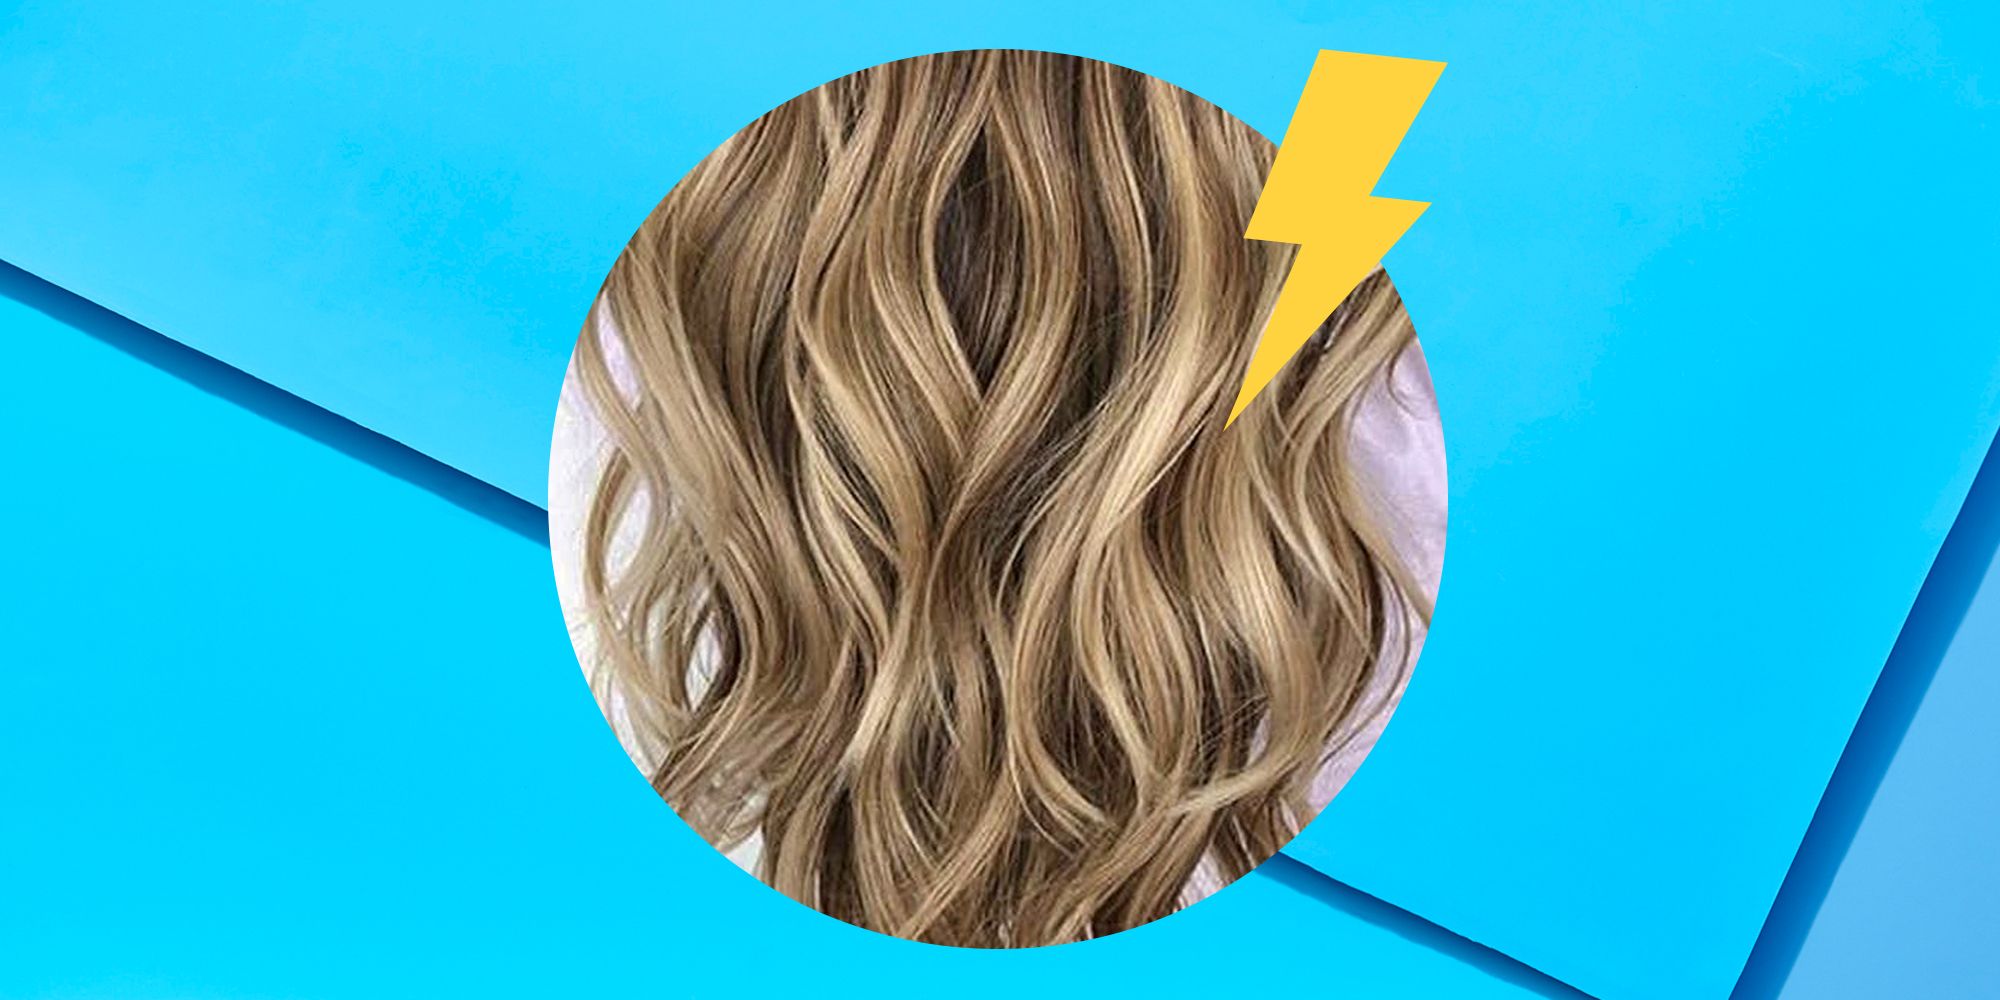 13 Best Hair Extensions For Every Hairstyle, Type, And Budget